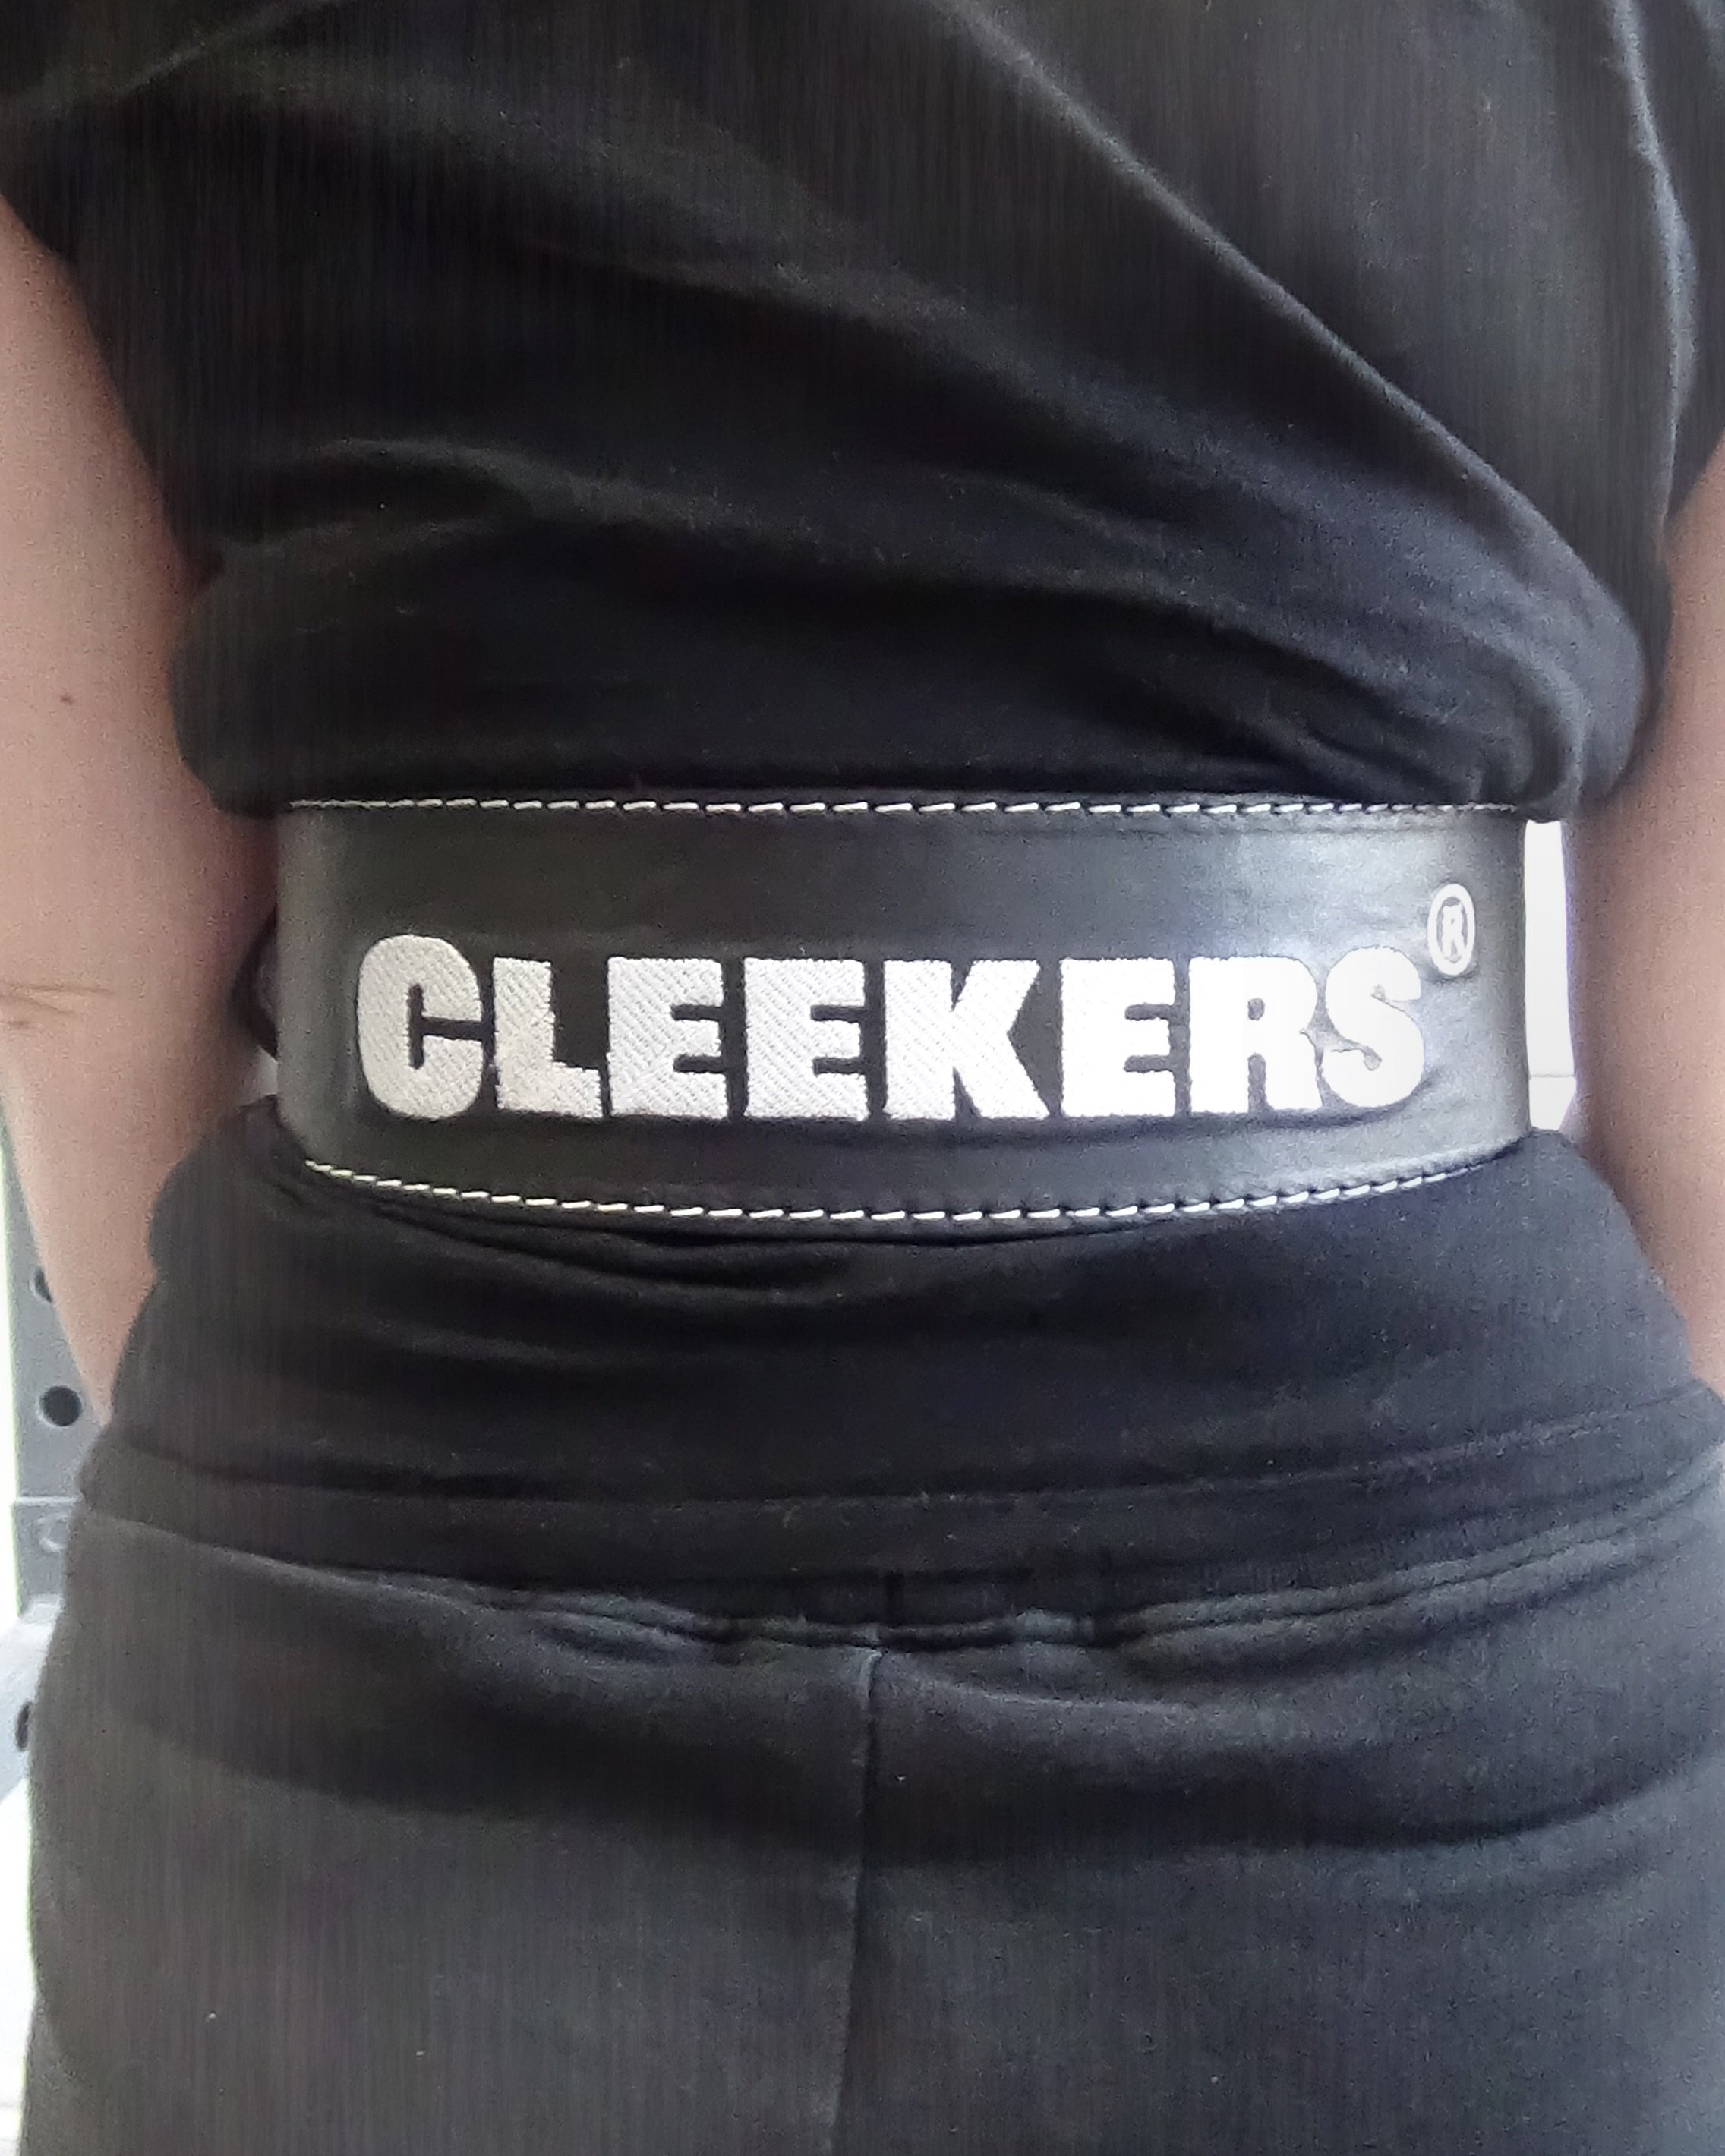 3 inch wide, 10 mm thick lifting belt with single prong buckle (factory second) - Cleekers